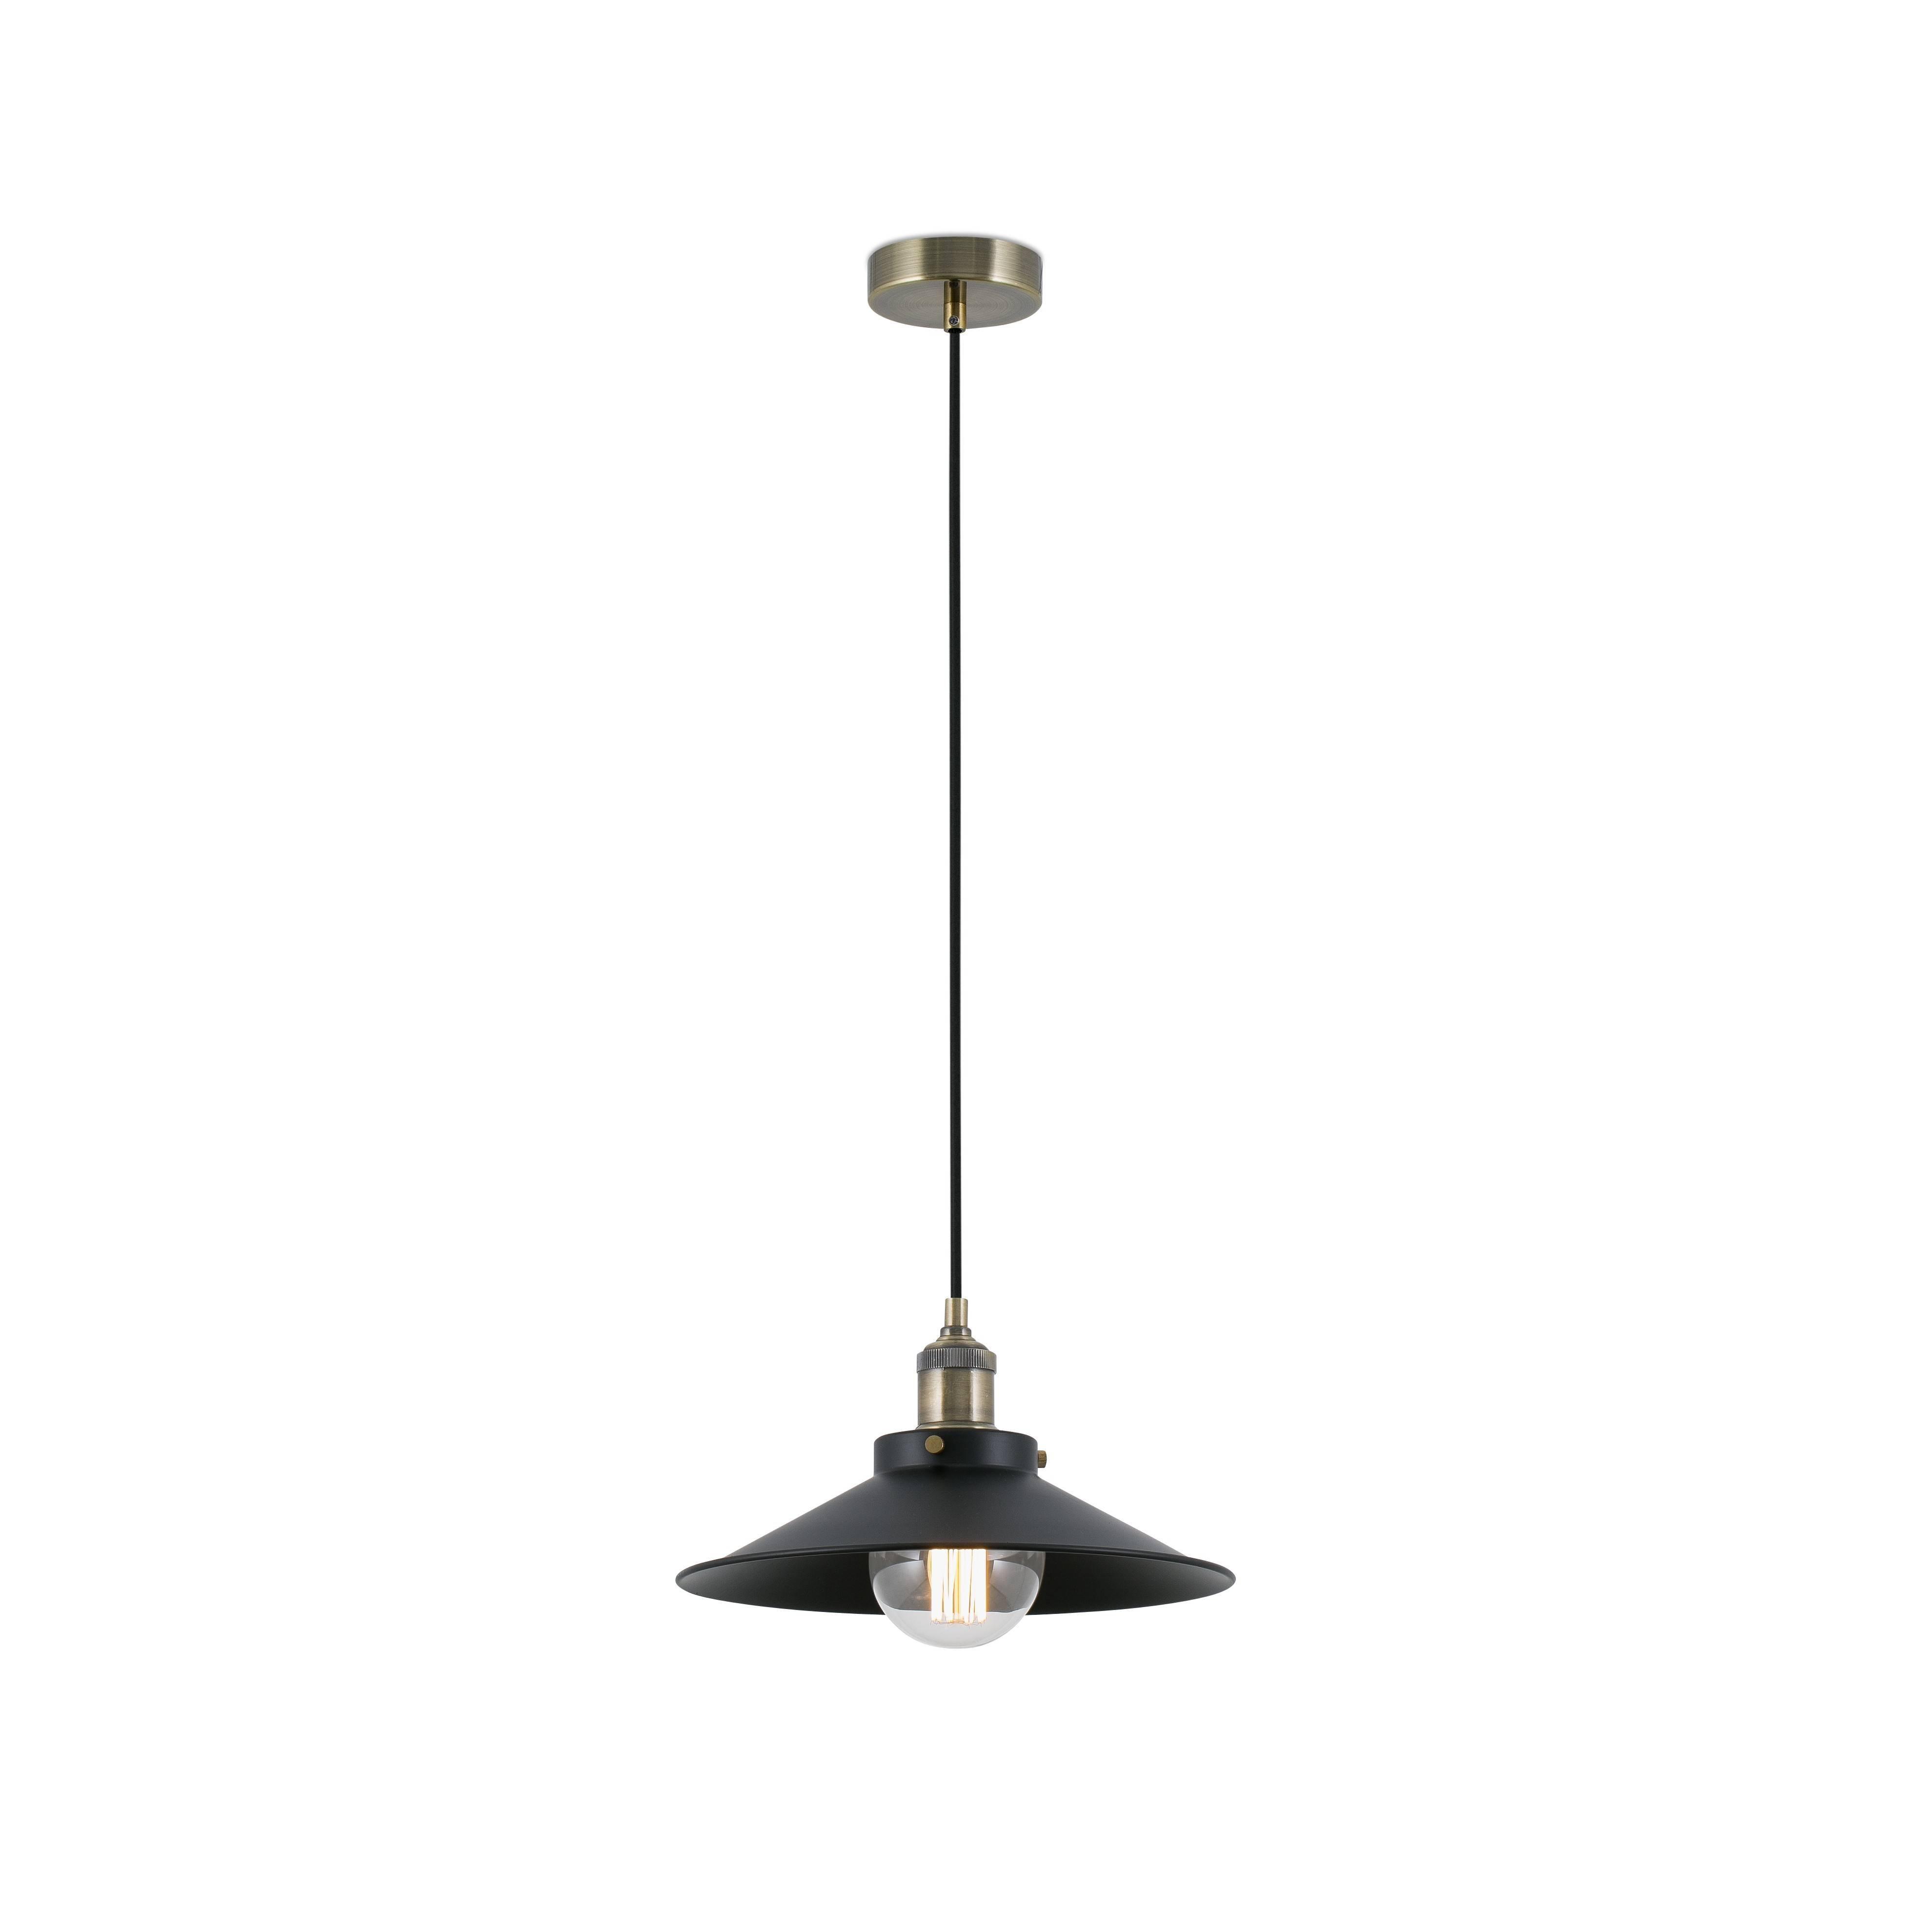 Marlin 1 Light Dome Ceiling Pendant Black Gold with Black Shade E27